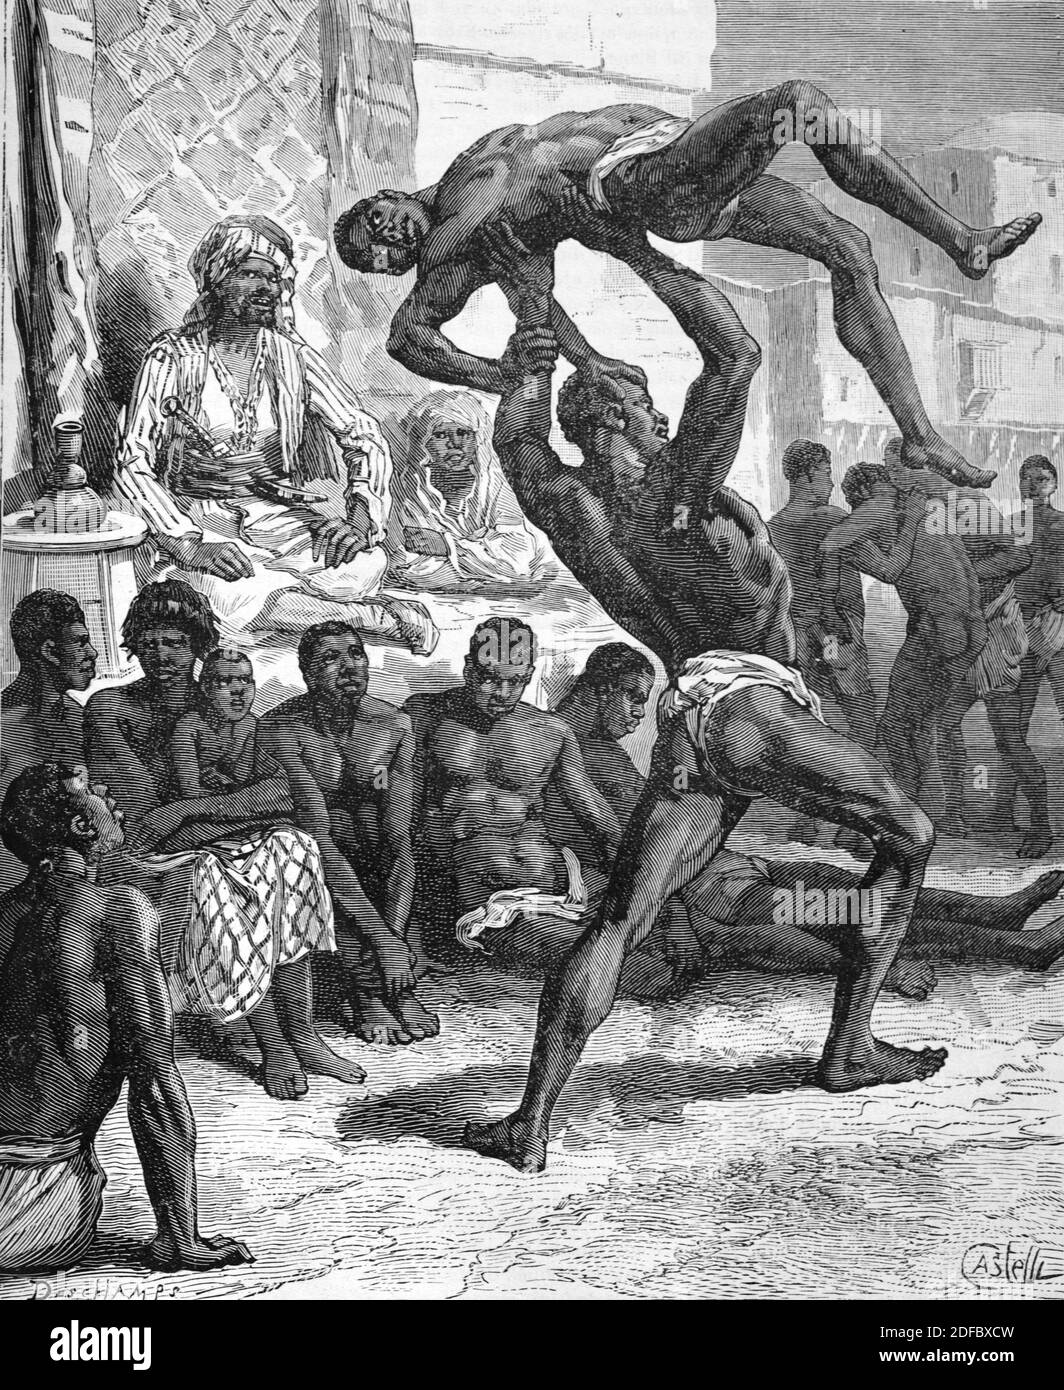 Slaves Wrestle in the Court of Muhammad Ahmad, Sufi Sheikh and Self-Declared Mahdi, Sudan (Engr Castelli 1884) Vintage Illustration or Engraving Stock Photo